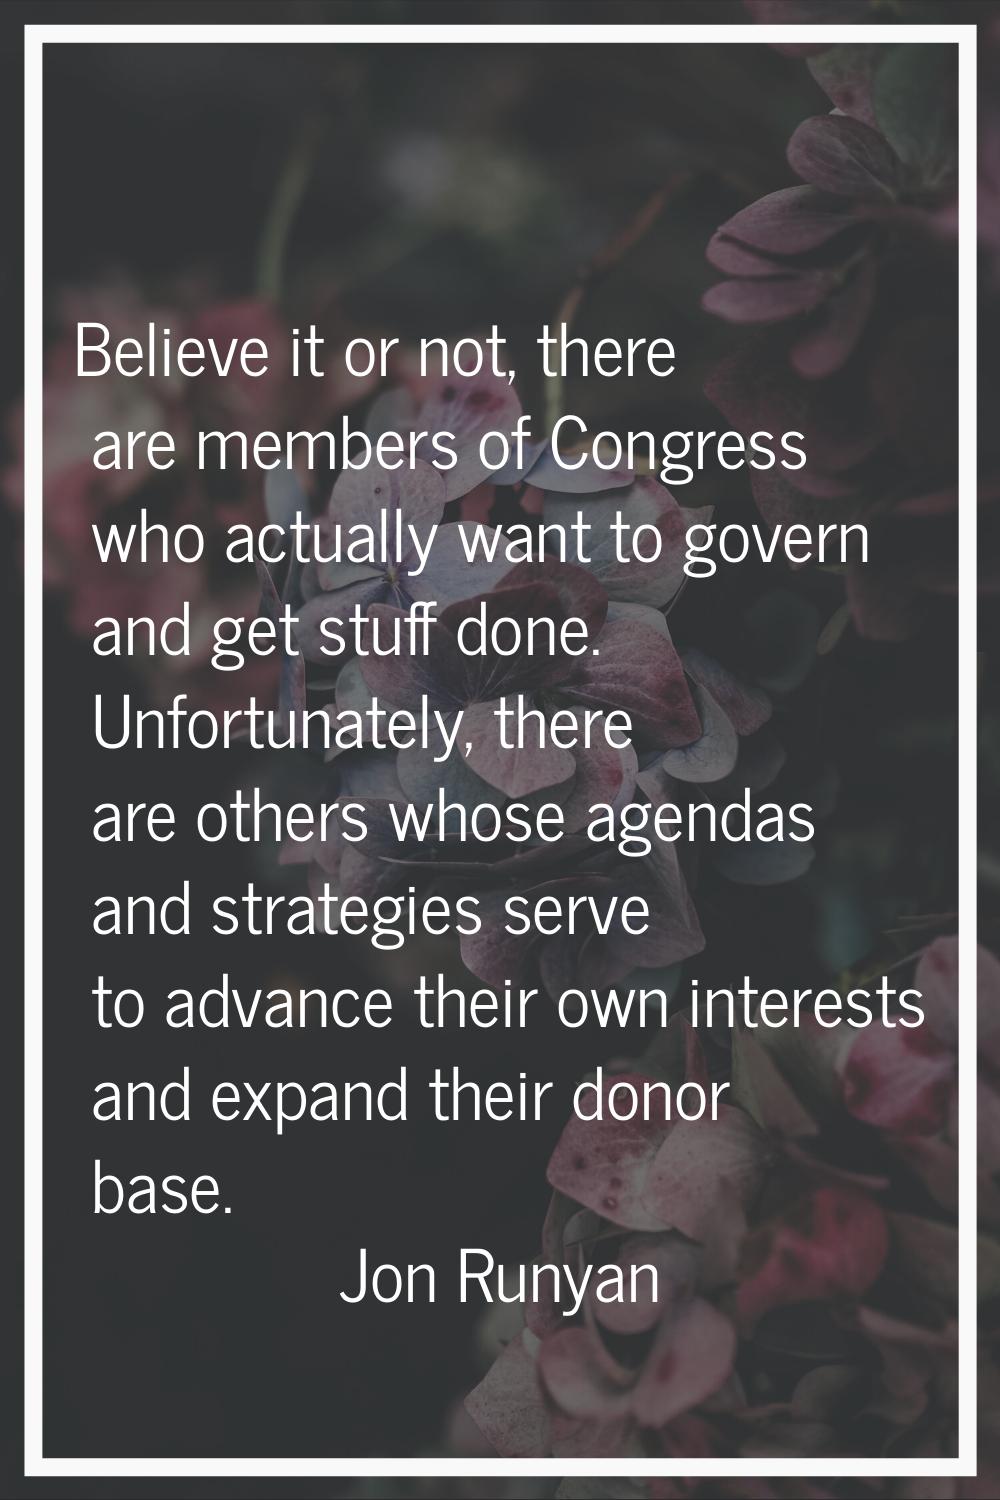 Believe it or not, there are members of Congress who actually want to govern and get stuff done. Un